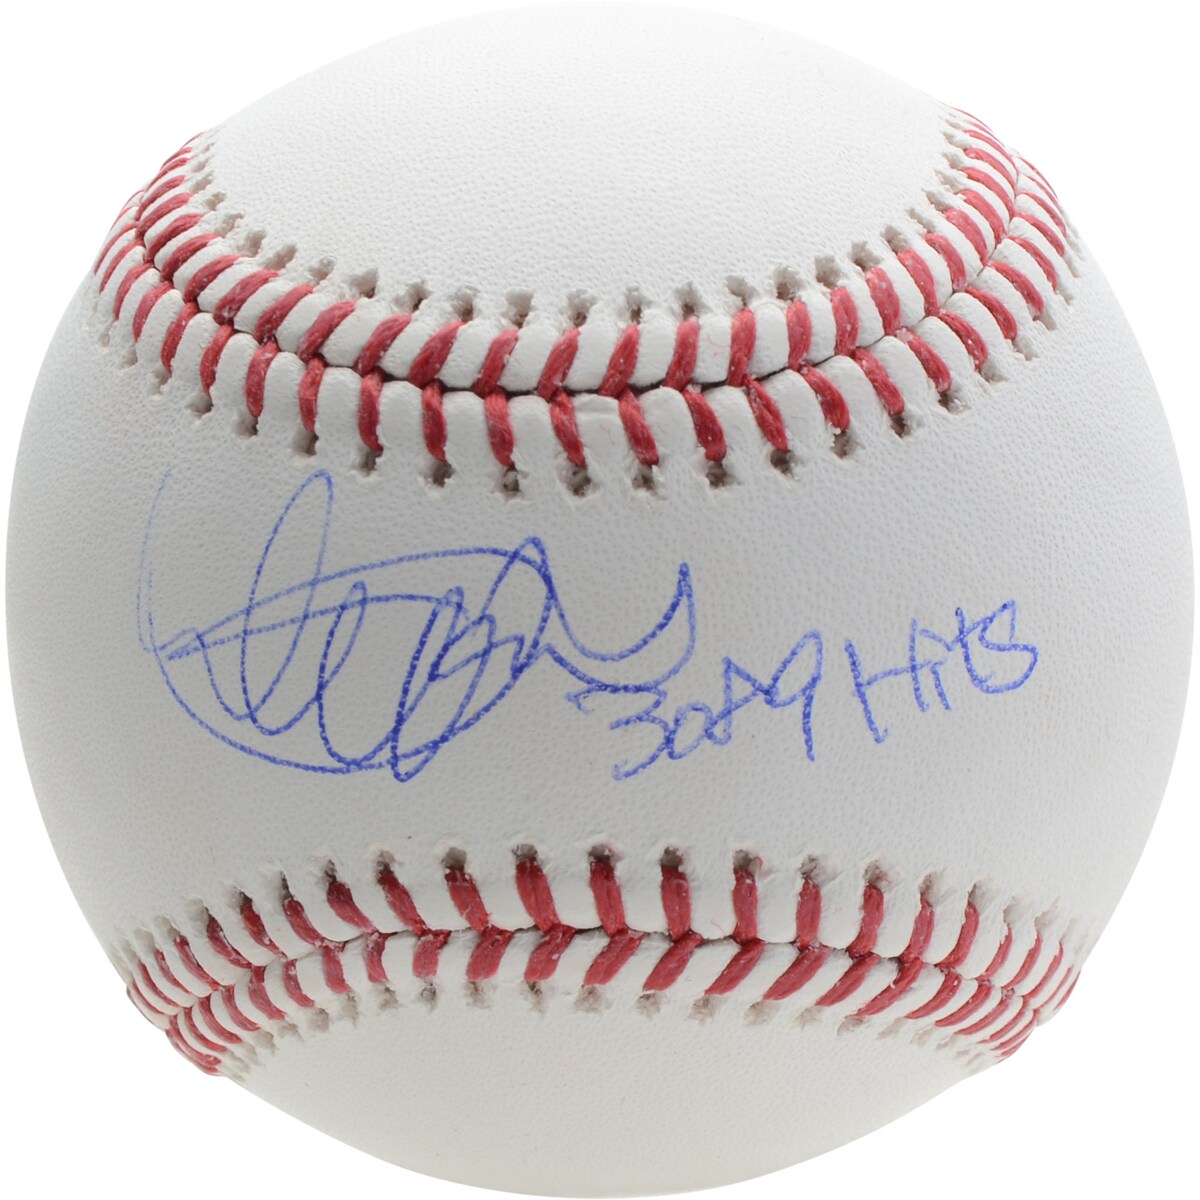 Take your Seattle Mariners memorabilia collection to another level with this baseball signed and inscribed by Ichiro Suzuki. After playing for nine years in the Nippon Professional Baseball league, Ichiro became the first Japanese-born position player to sign with an MLB team. He dominated in his first season as Mariner, as he paced the American League in batting average and stolen bases, won Rookie of the Year and MVP honors, and earned his first of 10 straight All-Star and Gold Glove selections. He finished his MLB career with a staggering 3,089 hits, good for 23rd in league history. Whether this signed baseball is displayed in your home or office, there's no better way to commemorate one of the greatest hitters of all time.Officially licensedAutographed baseballAuthenticated with FanSecure technologySignature may varyIncludes an individually numbered tamper evident hologramBrand: Fanatics Authentic